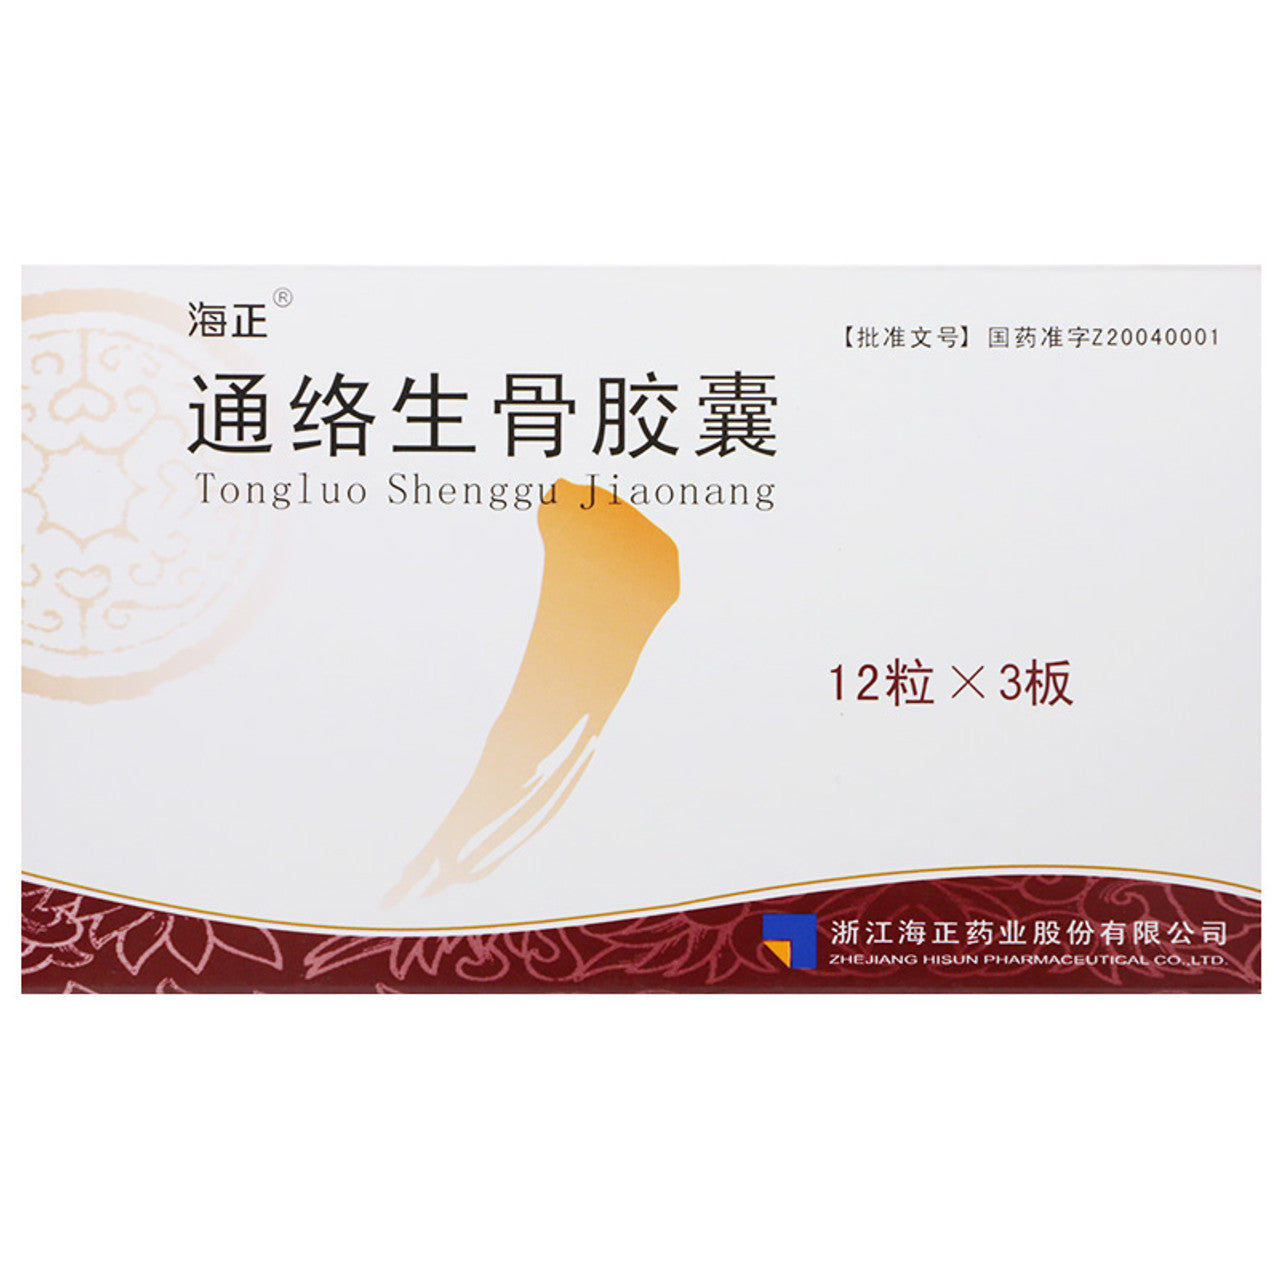 Chinese Herbs. Tongluo Shenggu Jiaonang or Tongluo Shenggu Capsules or Tong Luo Sheng Gu Jiao Nang For promoting blood circulation to remove blood stasis,clearing and activating the channels and collaterals,nourishing blood and promoting strong bones.